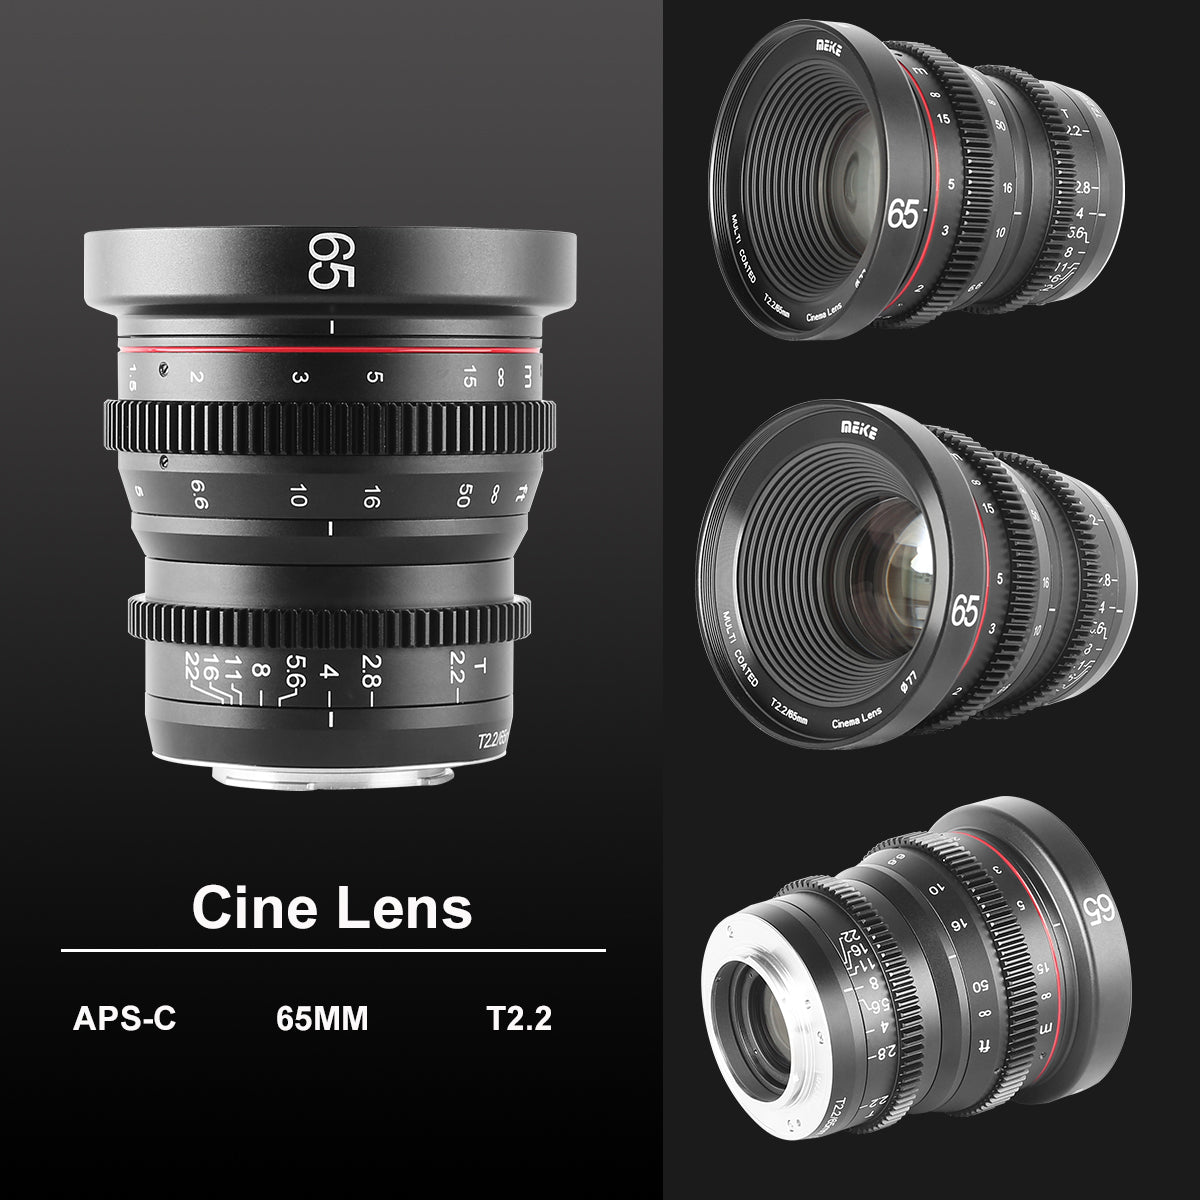 Meike Cinema Prime 65mm T2.2 Lens (Sony E Mount) in Different Perspectives